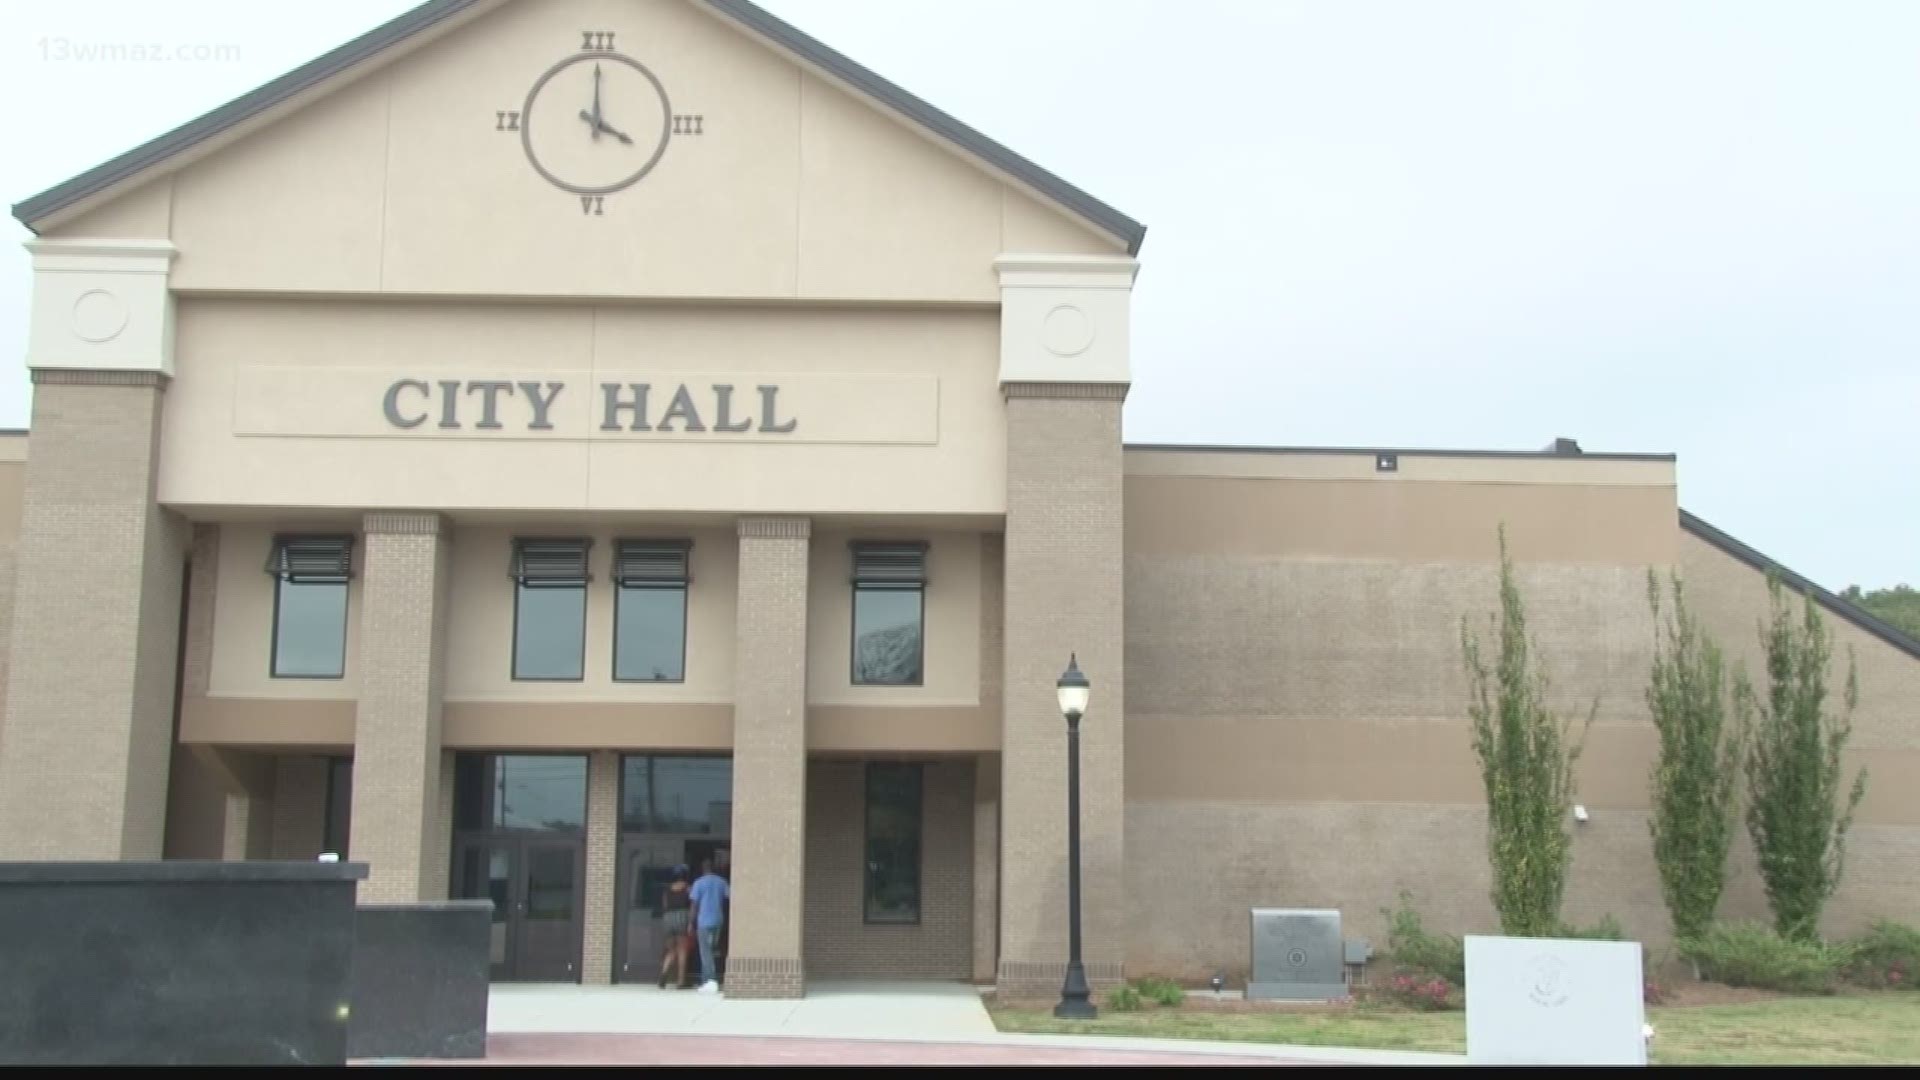 An email battle broke out this week between Warner Robins Mayor Randy Toms and Councilman Daron Lee.